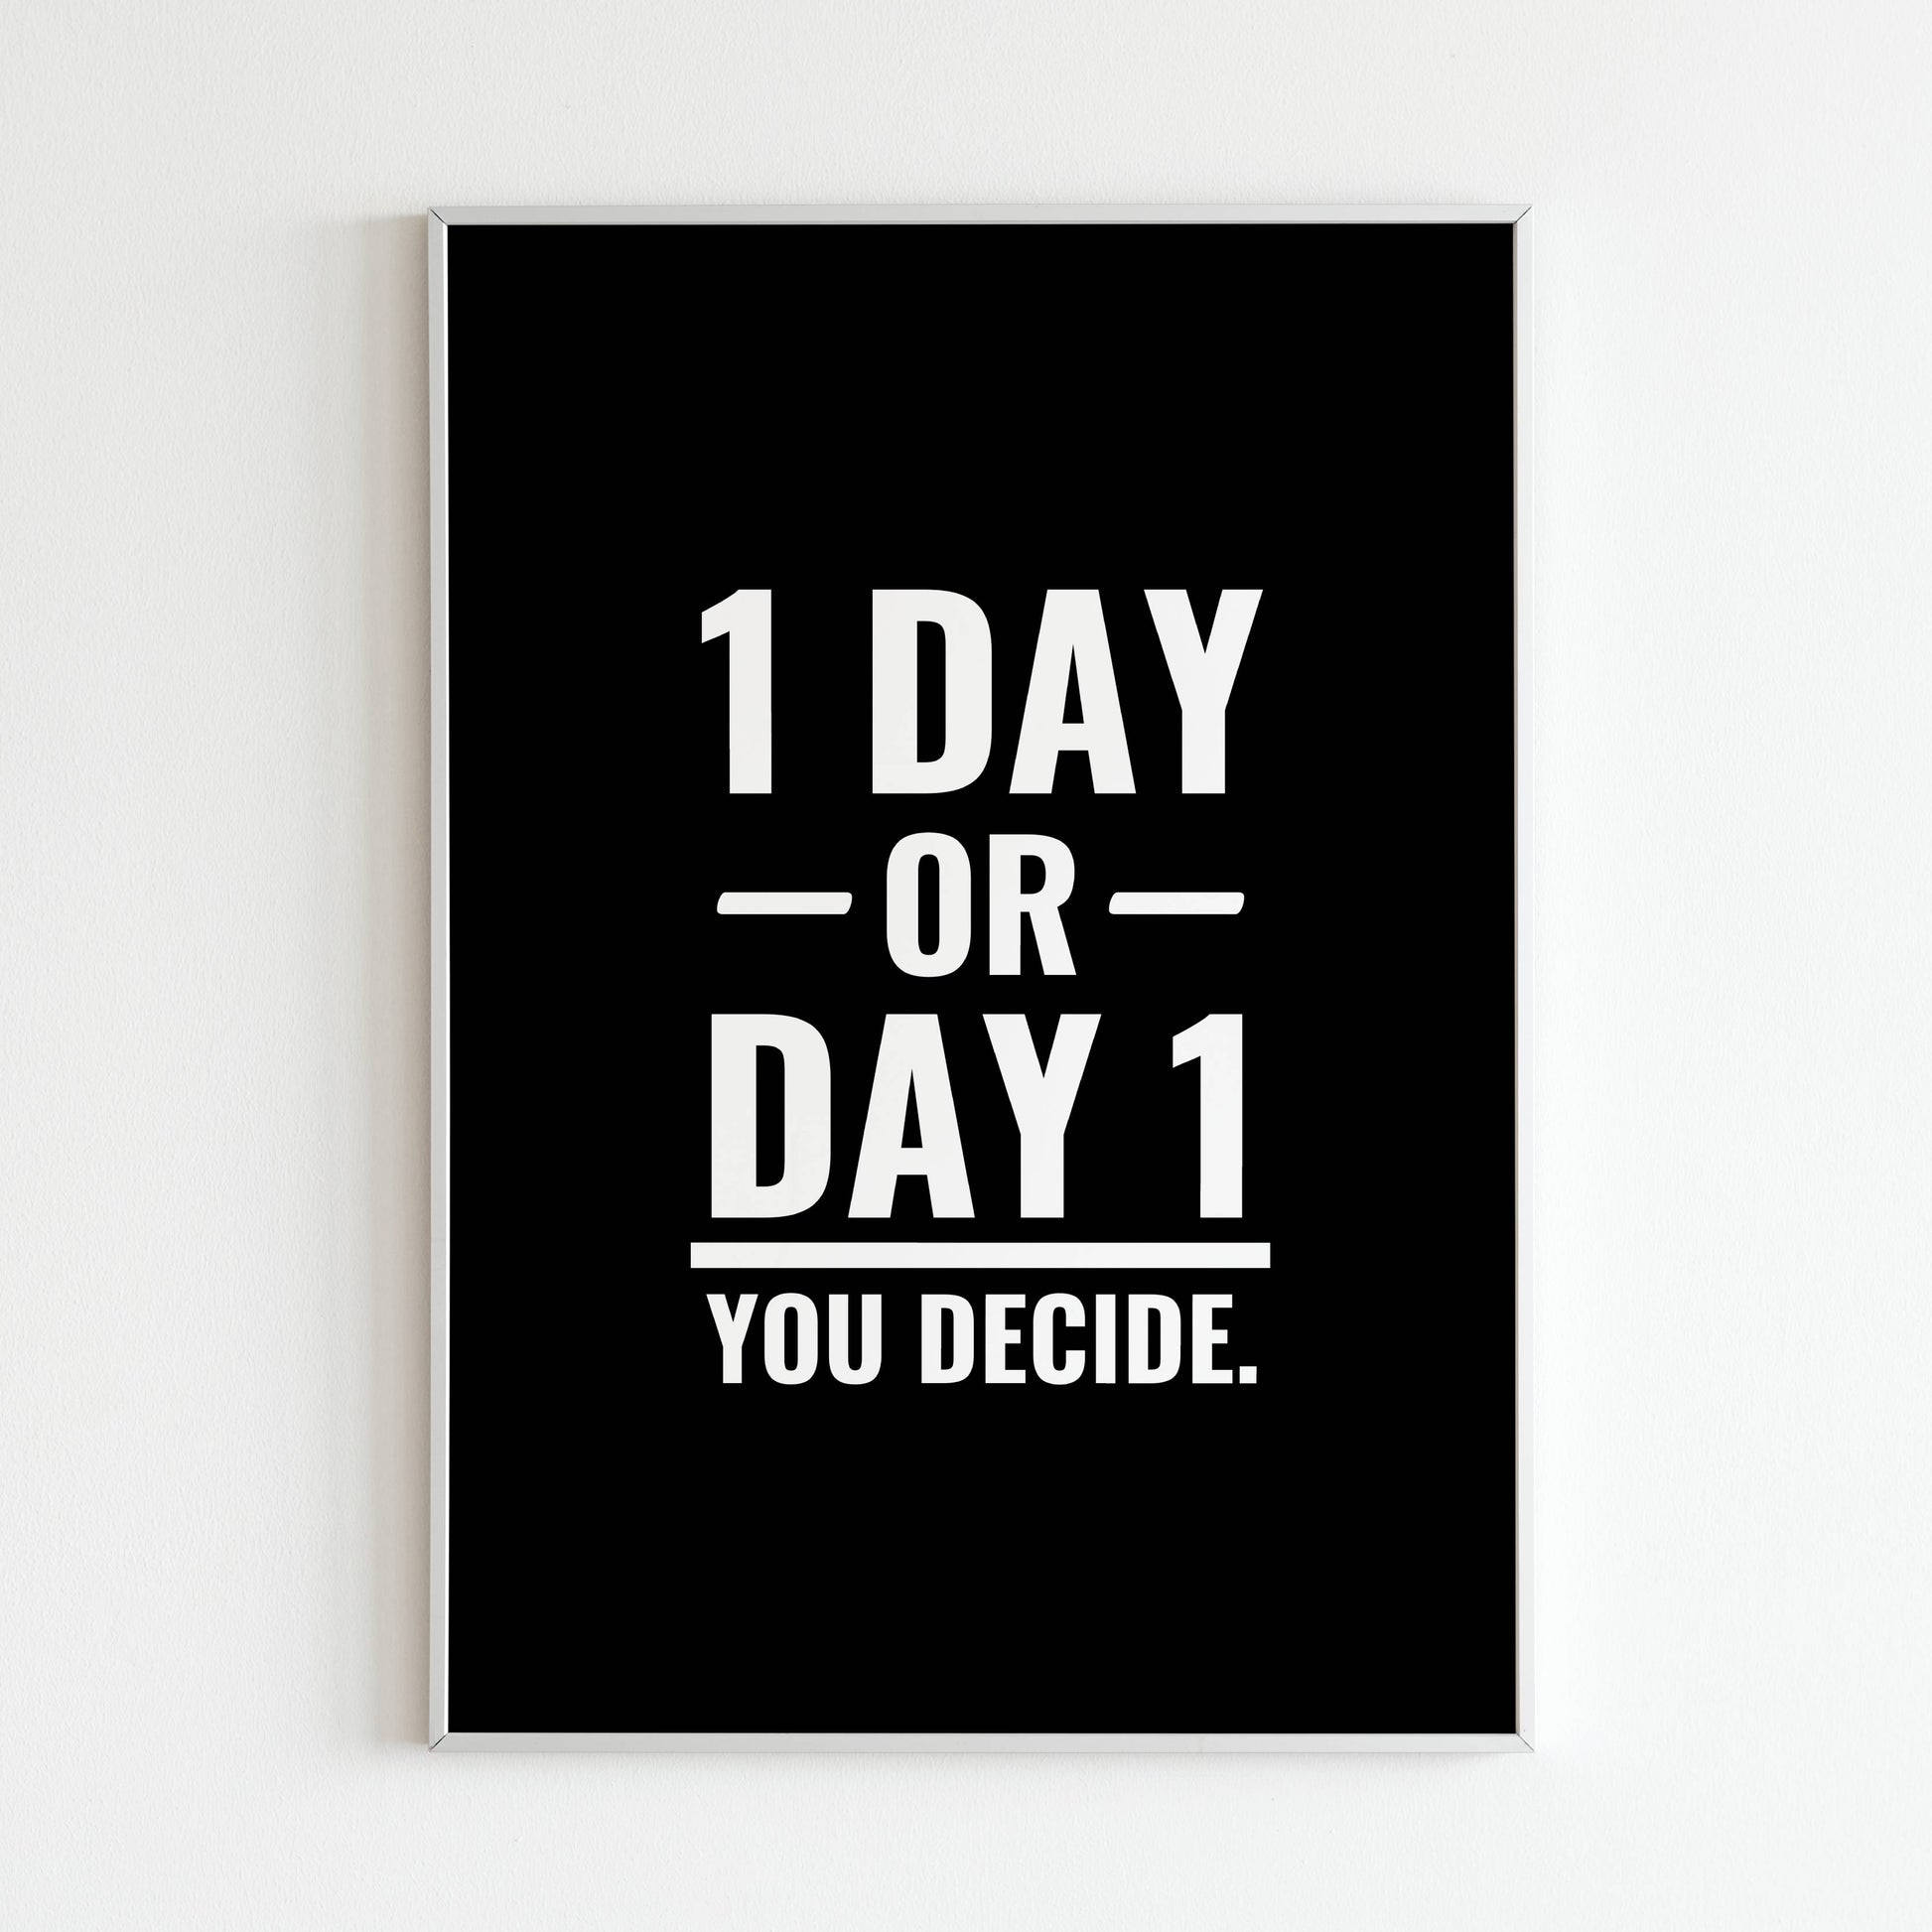 Downloadable "1 Day or Day 1" wall art for a reminder to start taking action today.